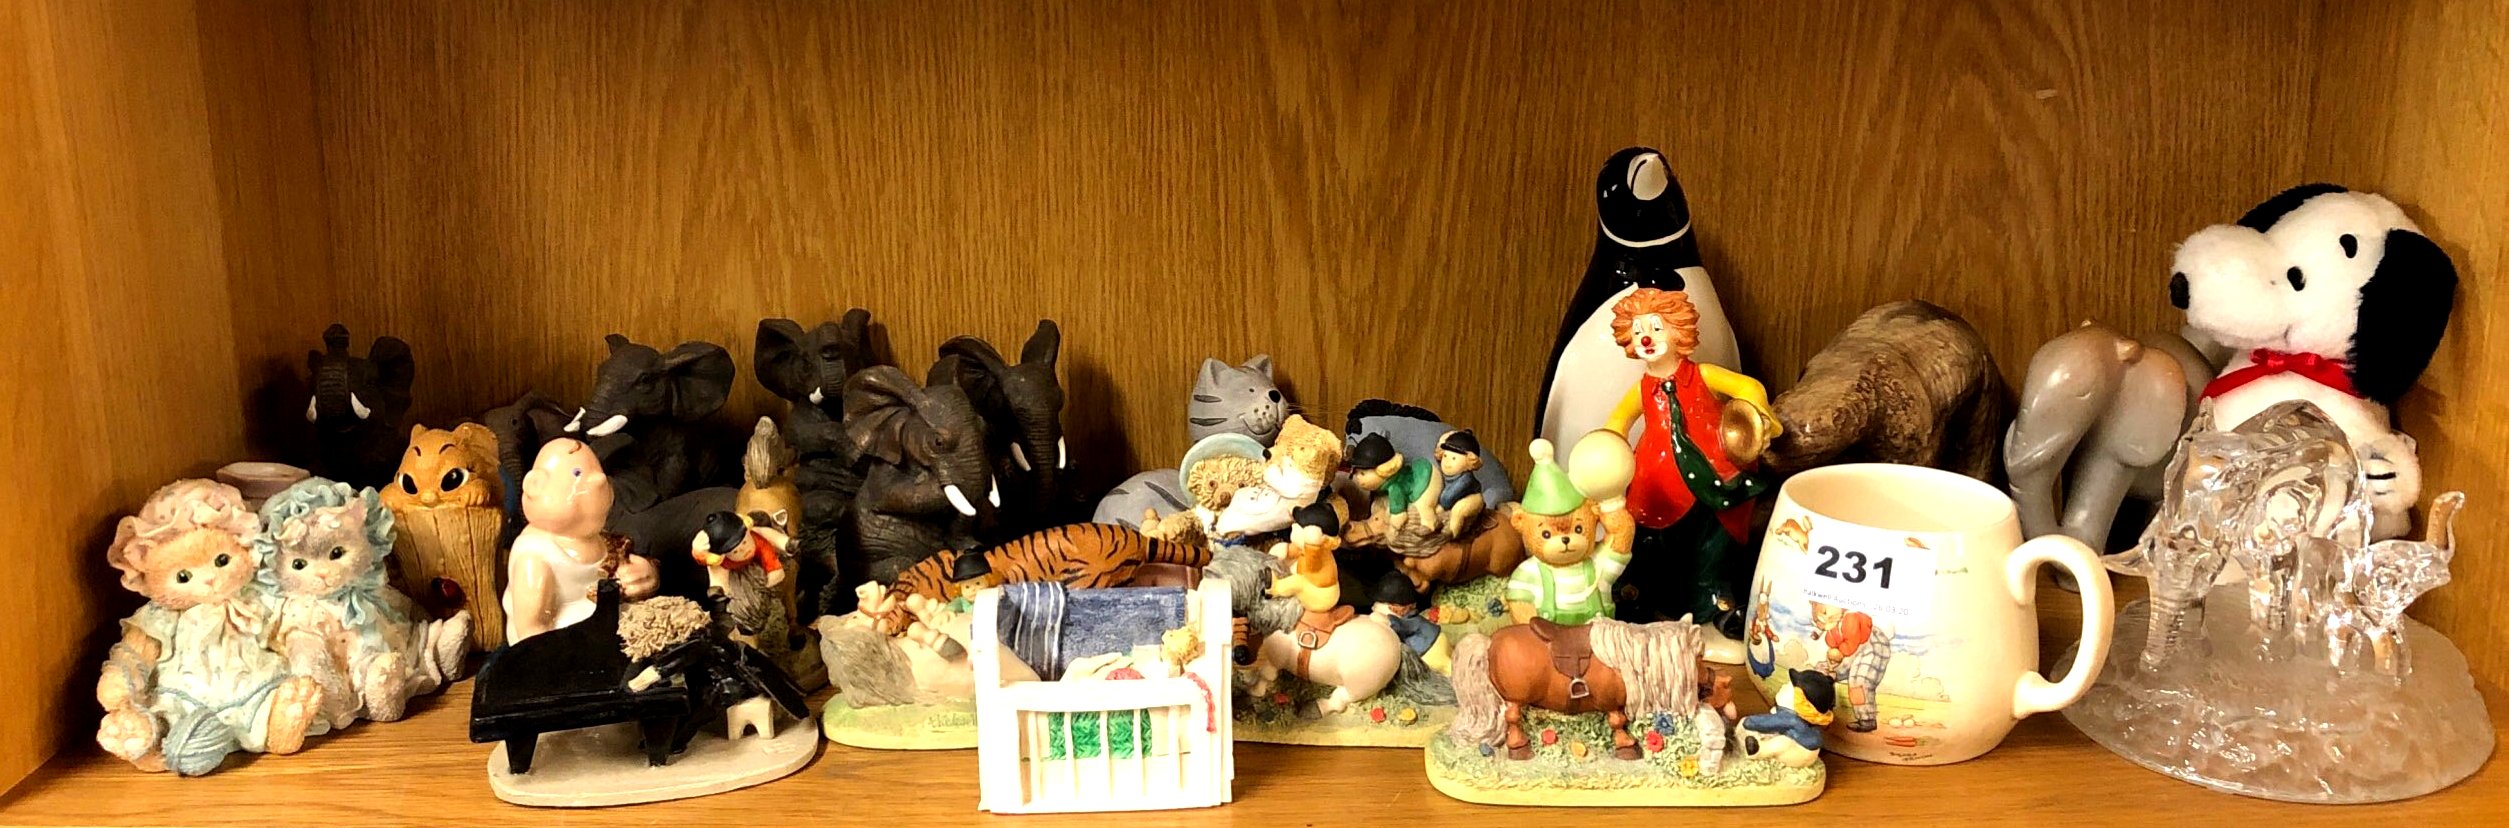 A large quantity of resin and other animal figures.